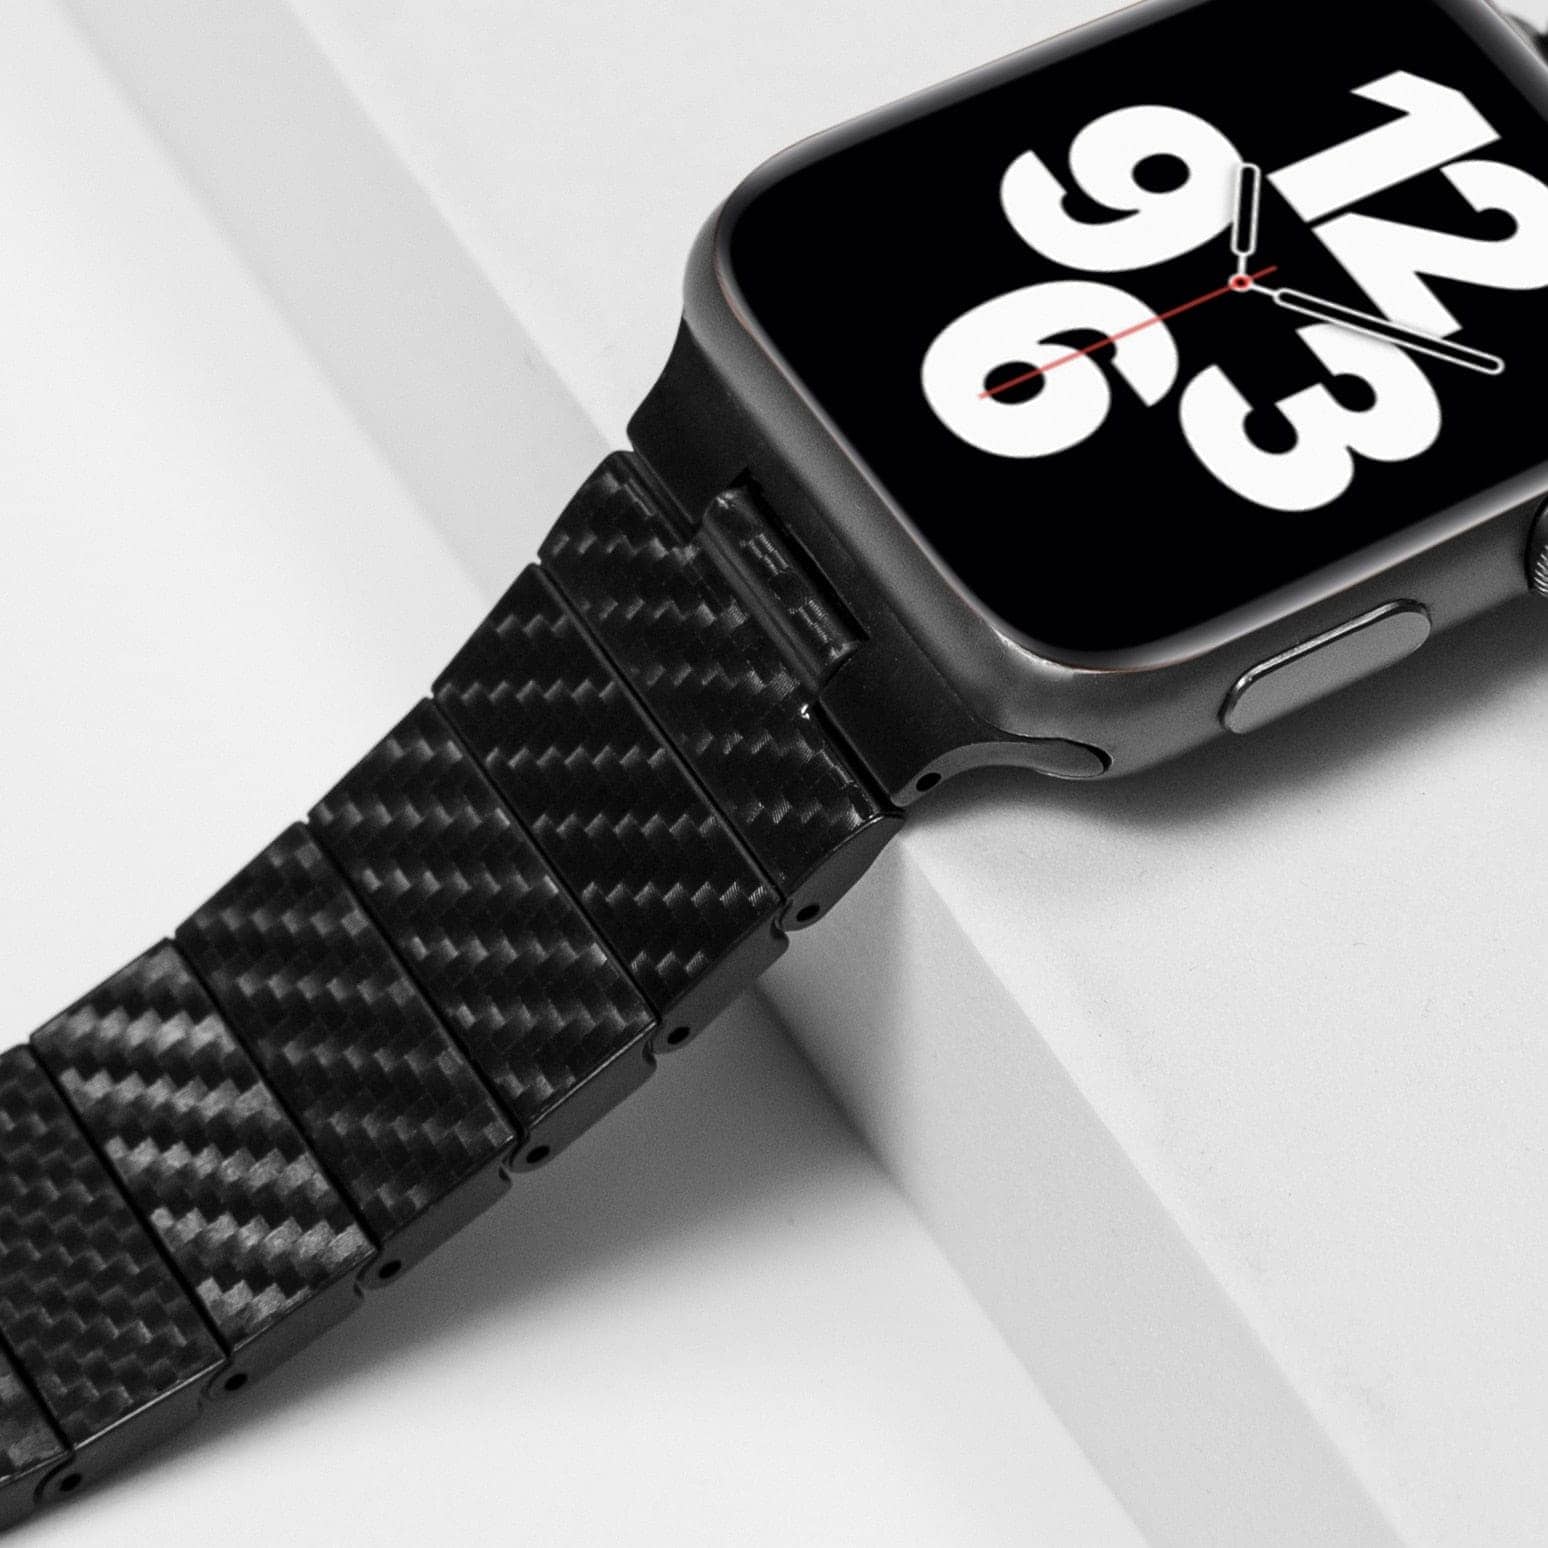 Which is the Best Apple Watch Band Material? – PITAKA